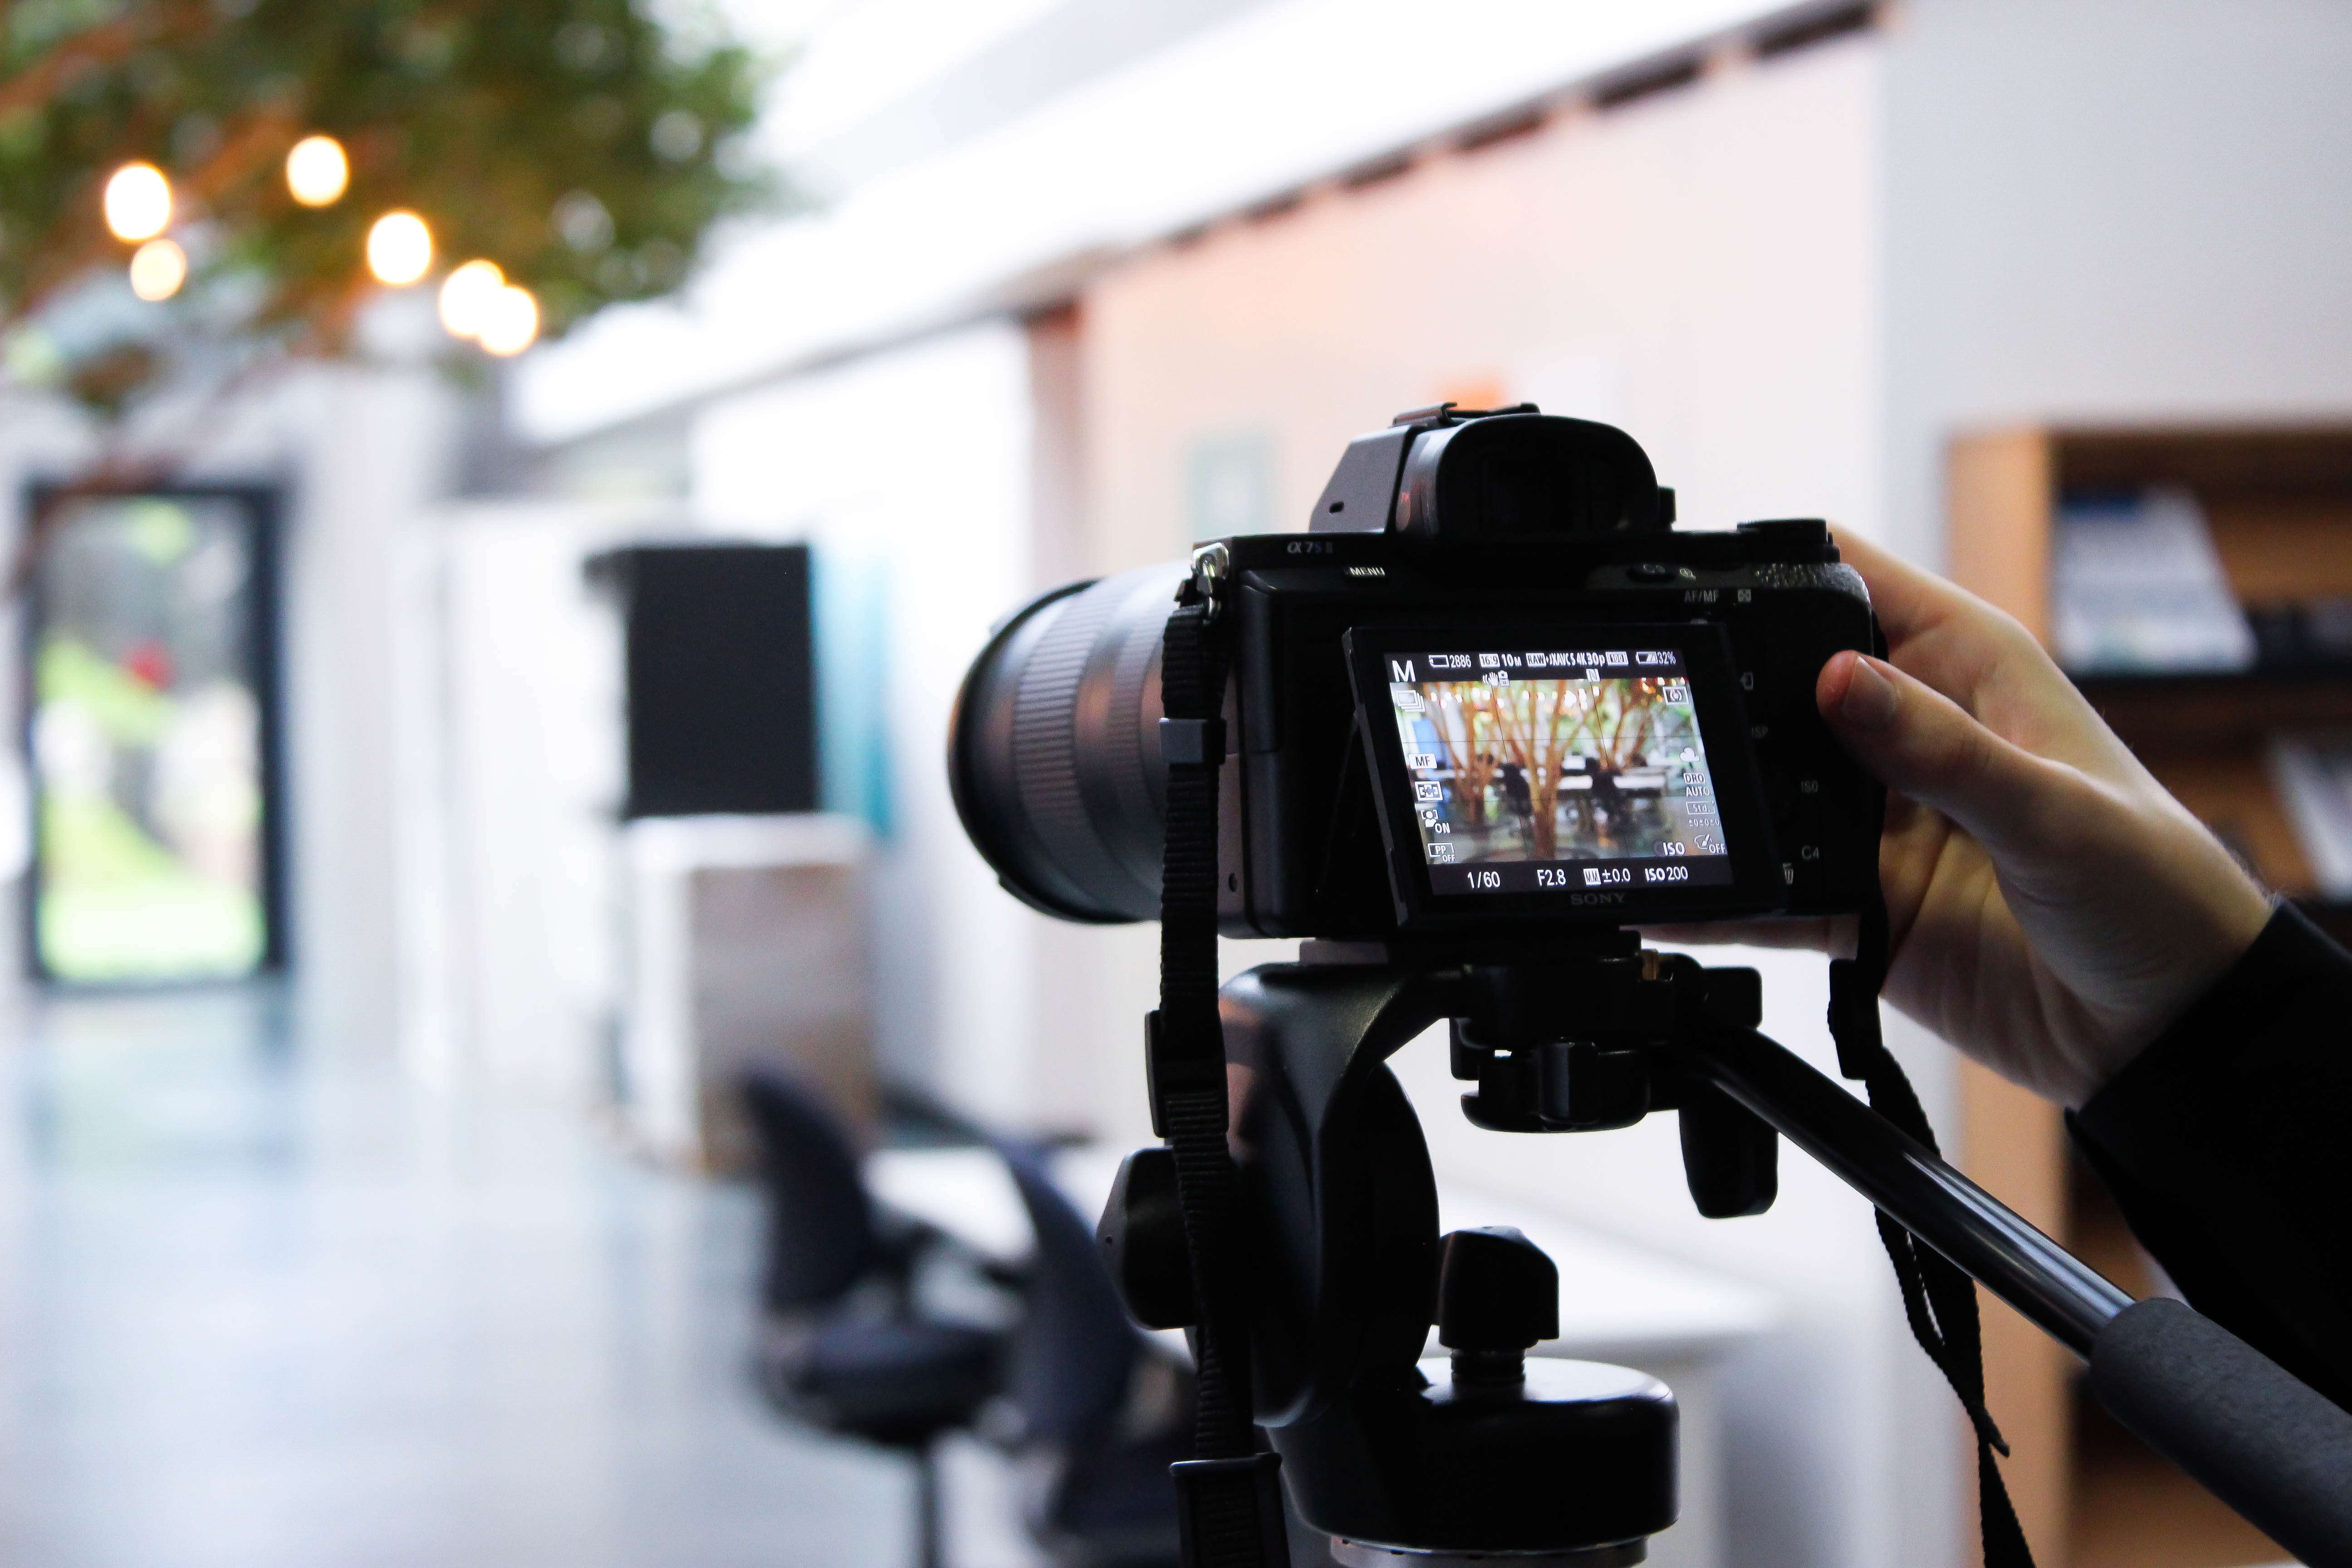 DSLR camera filming b-roll footage in a modern office environment